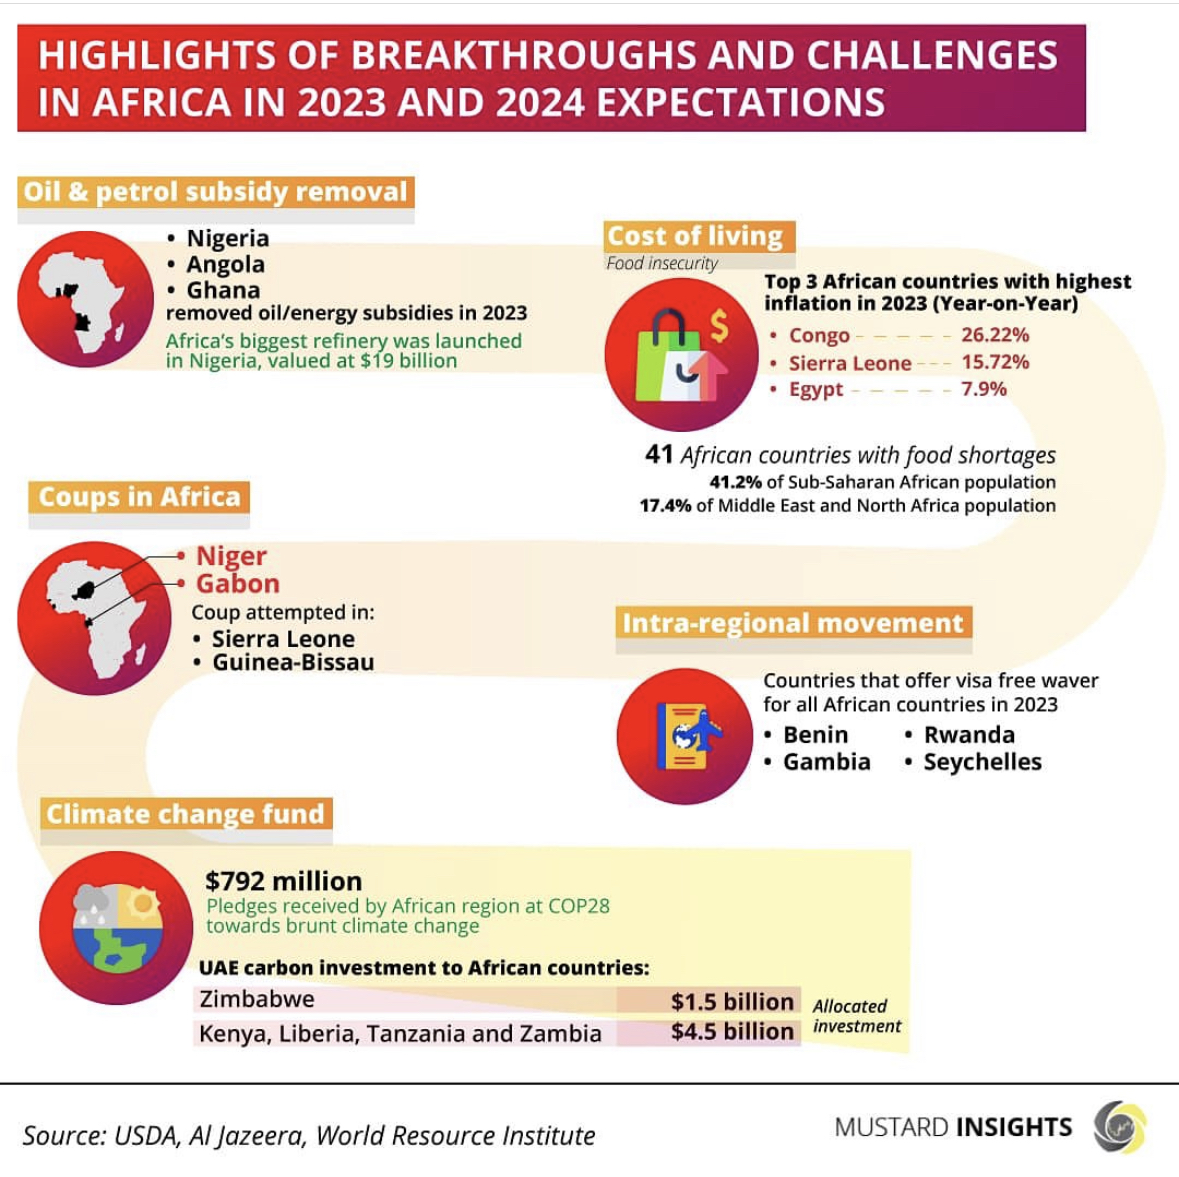 Highlights of Breakthroughs and Challenges in Africa in 2023 and Expectations for 2024